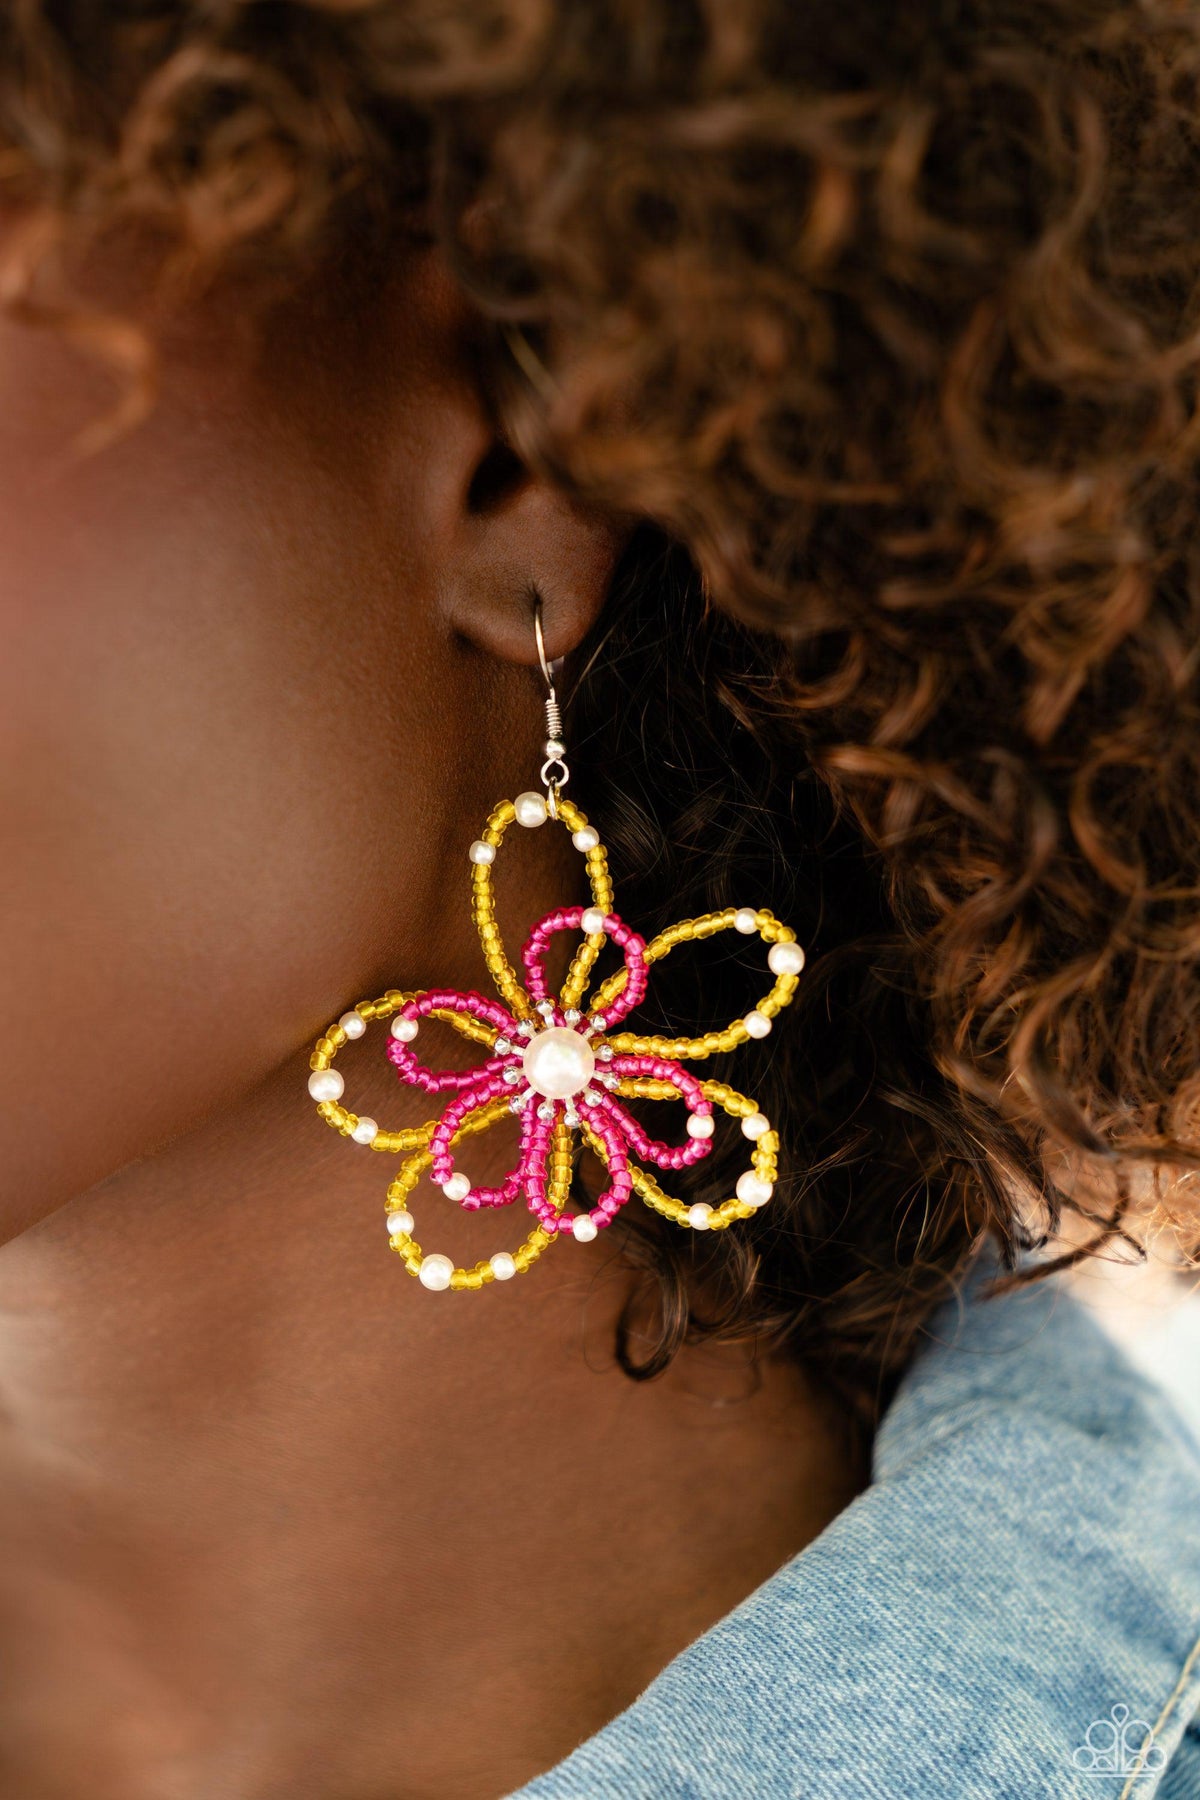 PEARL Crush Yellow &amp; Pink Flower Earrings - Paparazzi Accessories-on model - CarasShop.com - $5 Jewelry by Cara Jewels